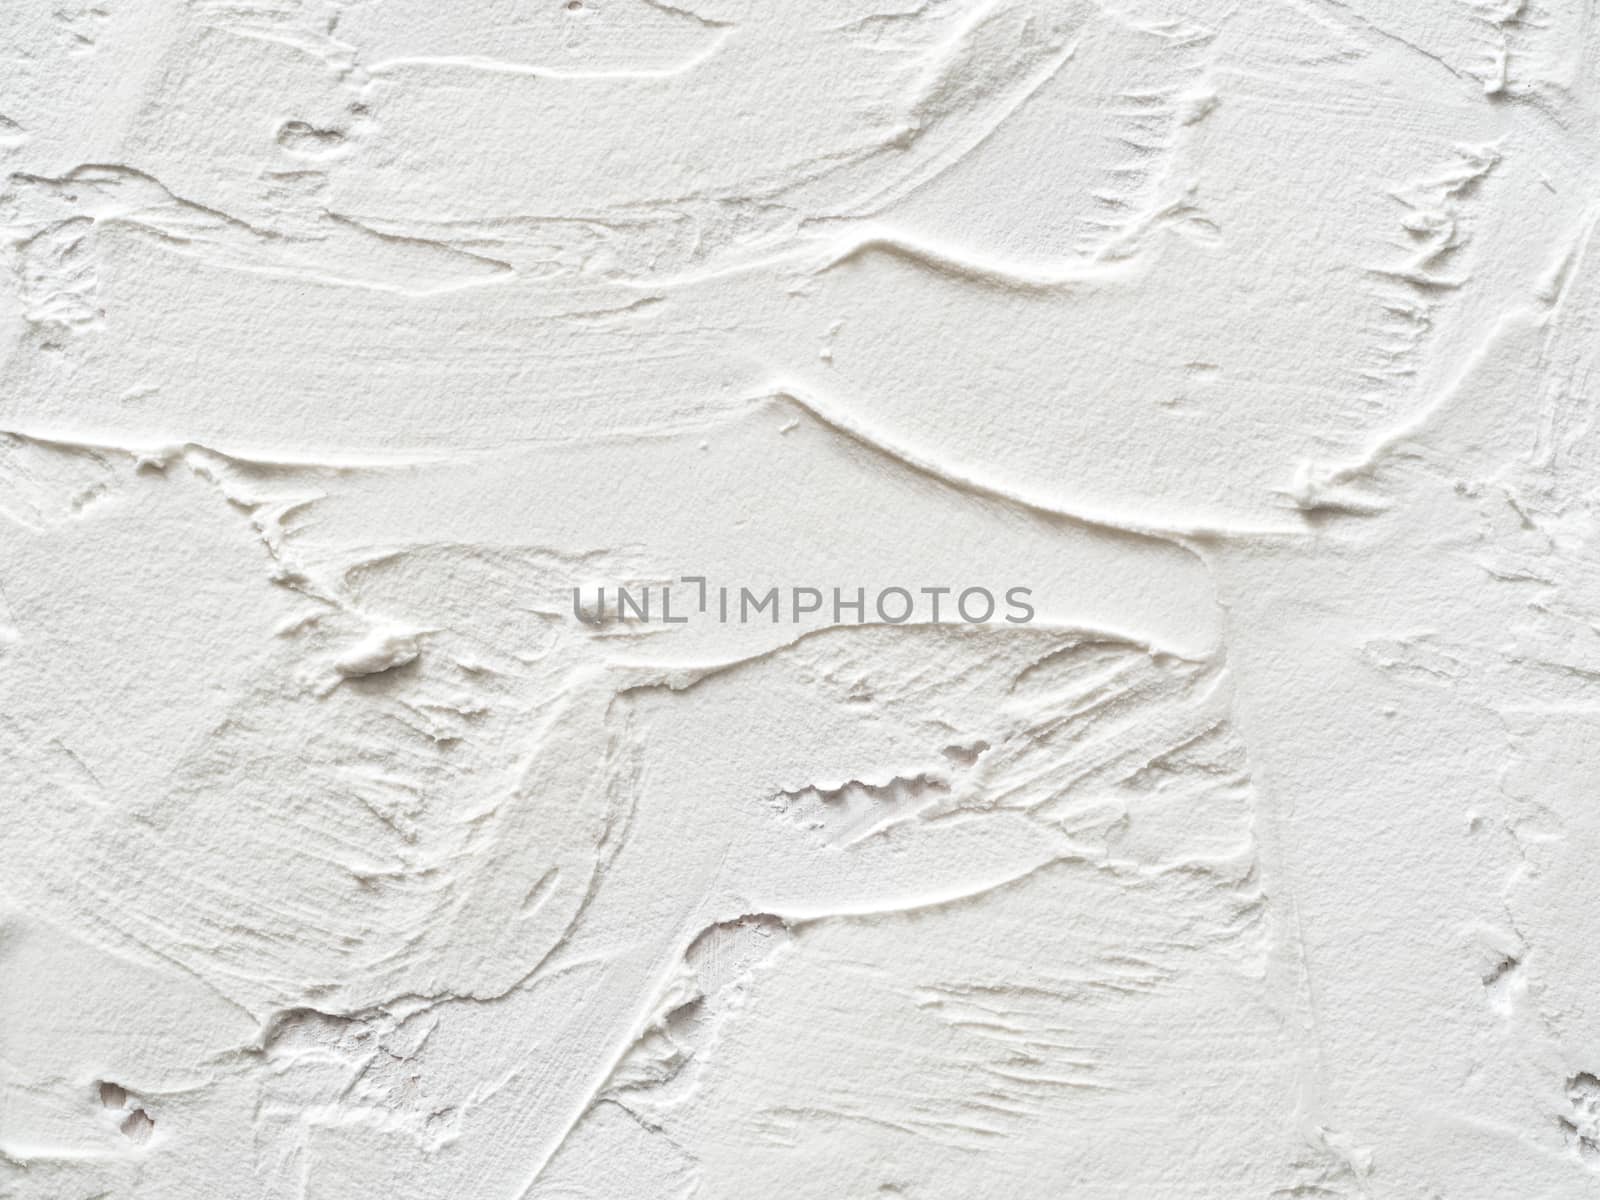 Vintage or grungy white background of natural cement or stone old texture as retro pattern layout. It is a concept, conceptual or metaphor wall banner, grunge, material, aged, rust or construction.